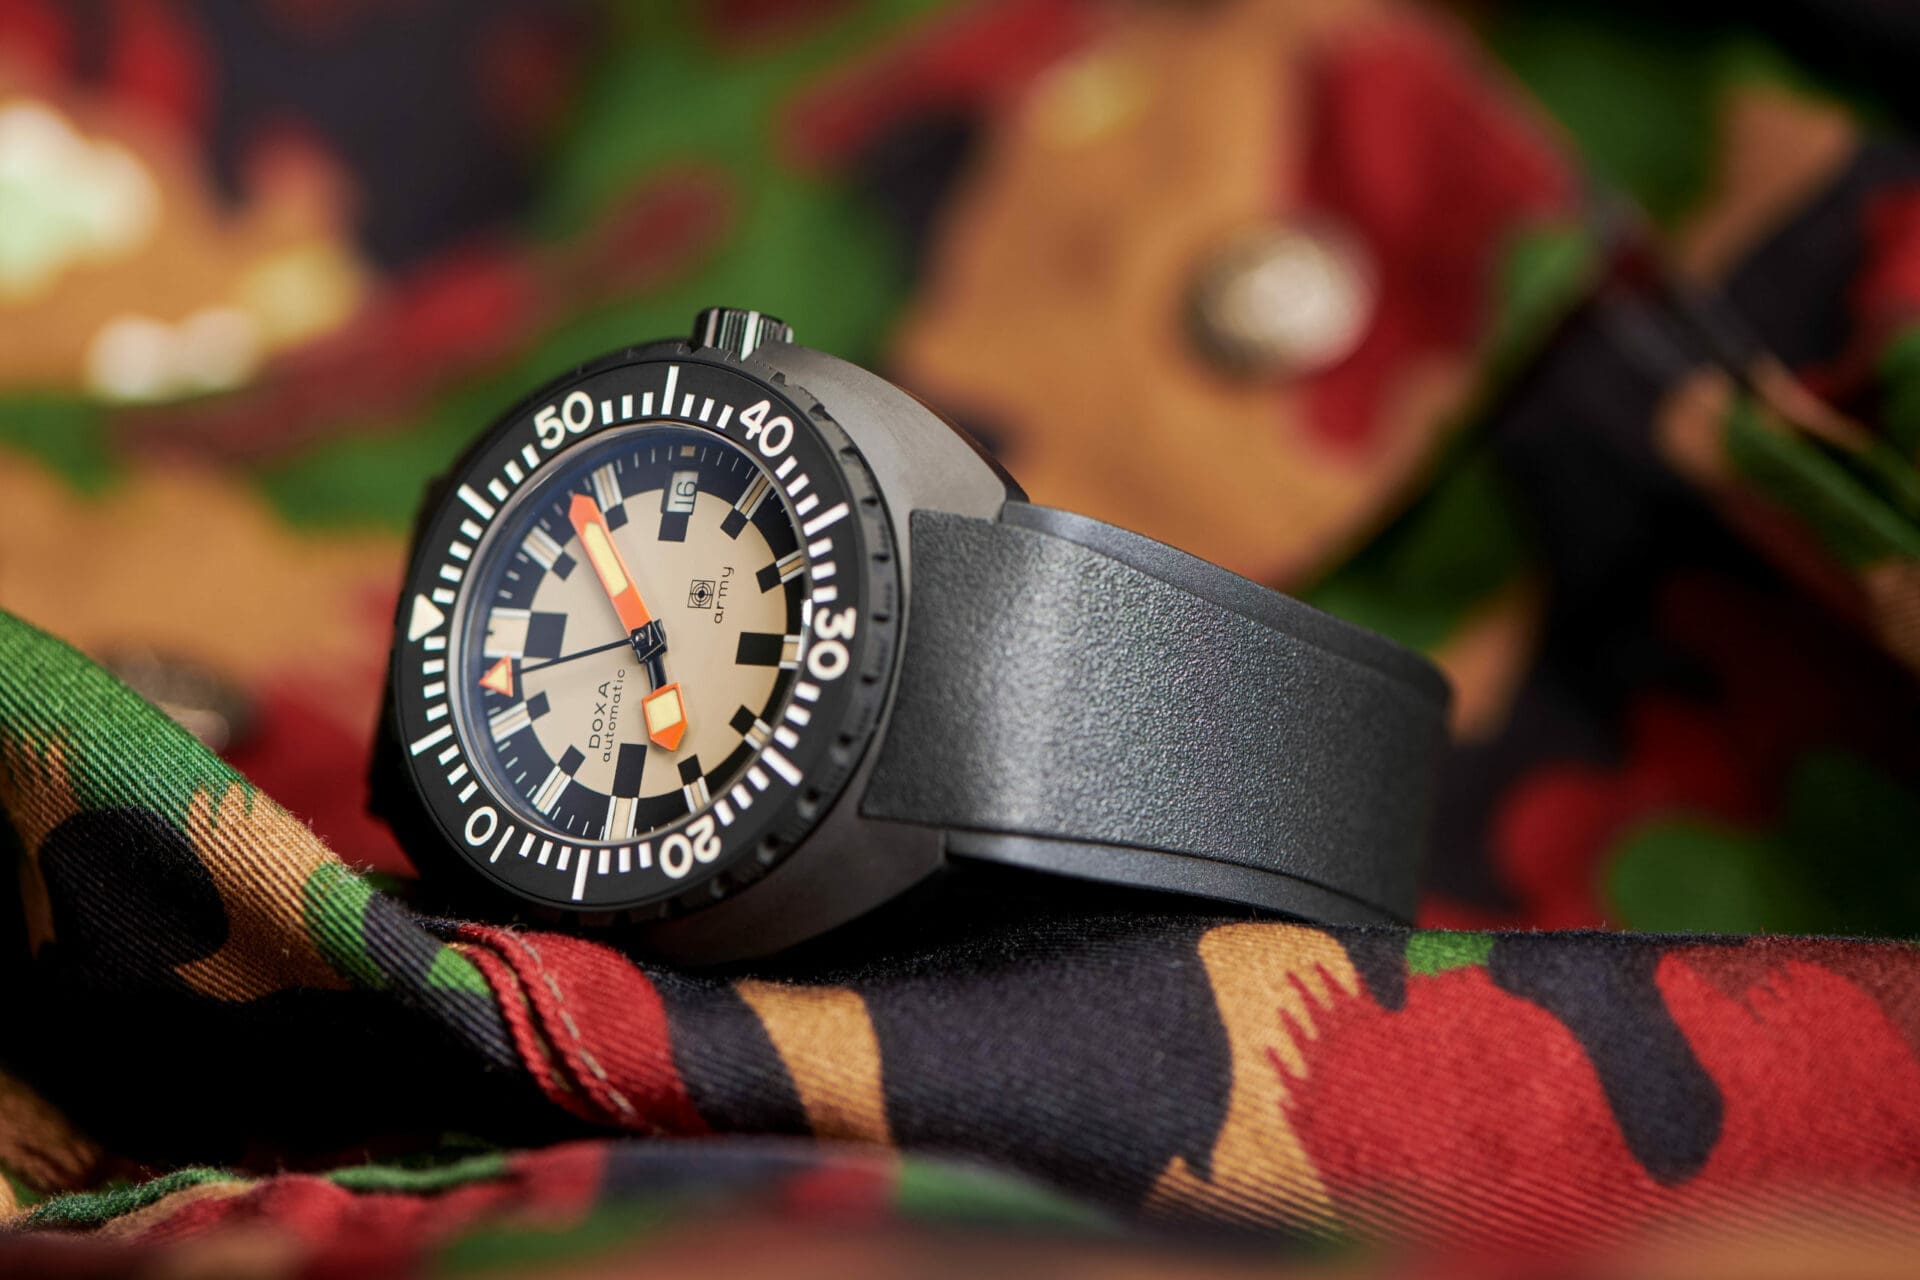 IN-DEPTH: The Doxa Army makes a welcome return to active duty